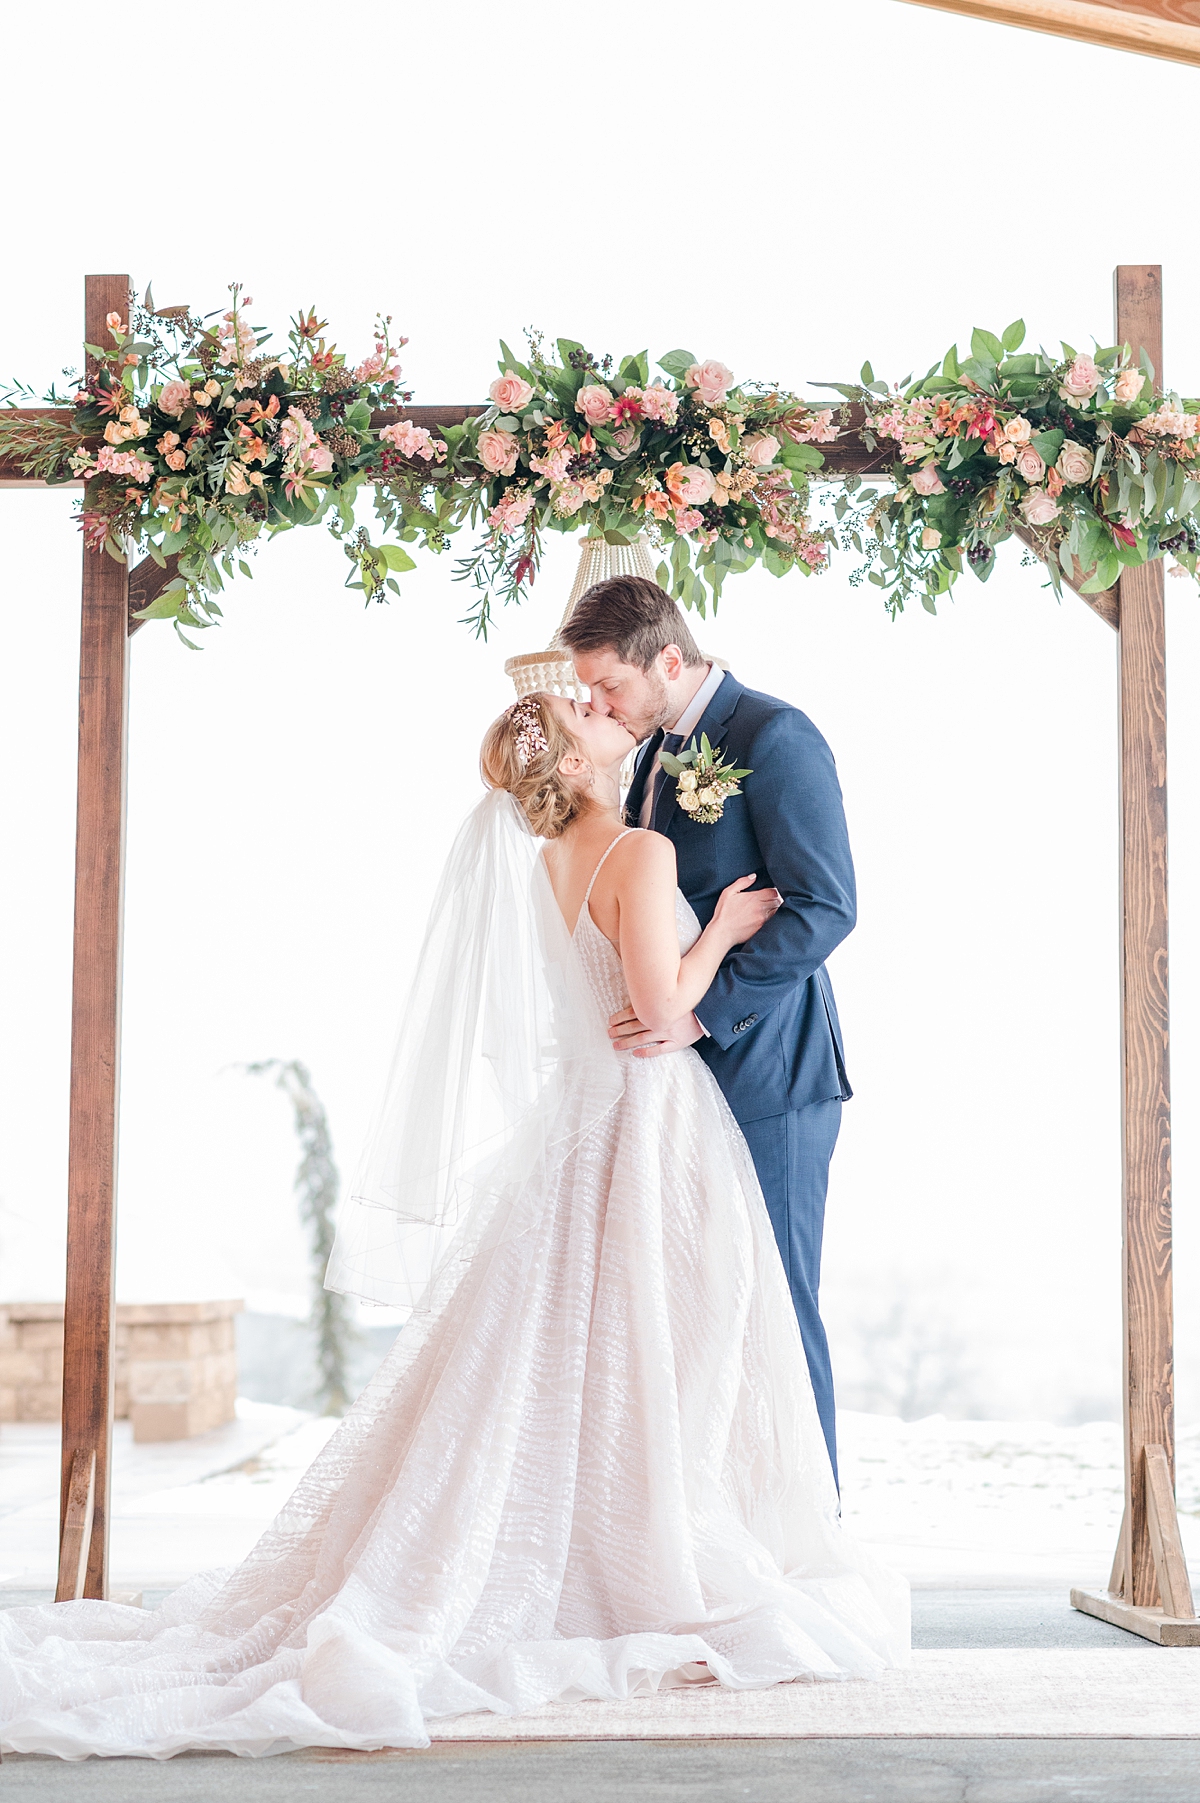 Winter East View Farms Wedding Styled Shoot by Heather Lea Events and Virginia Wedding Photographer Kailey Brianne Photography. 